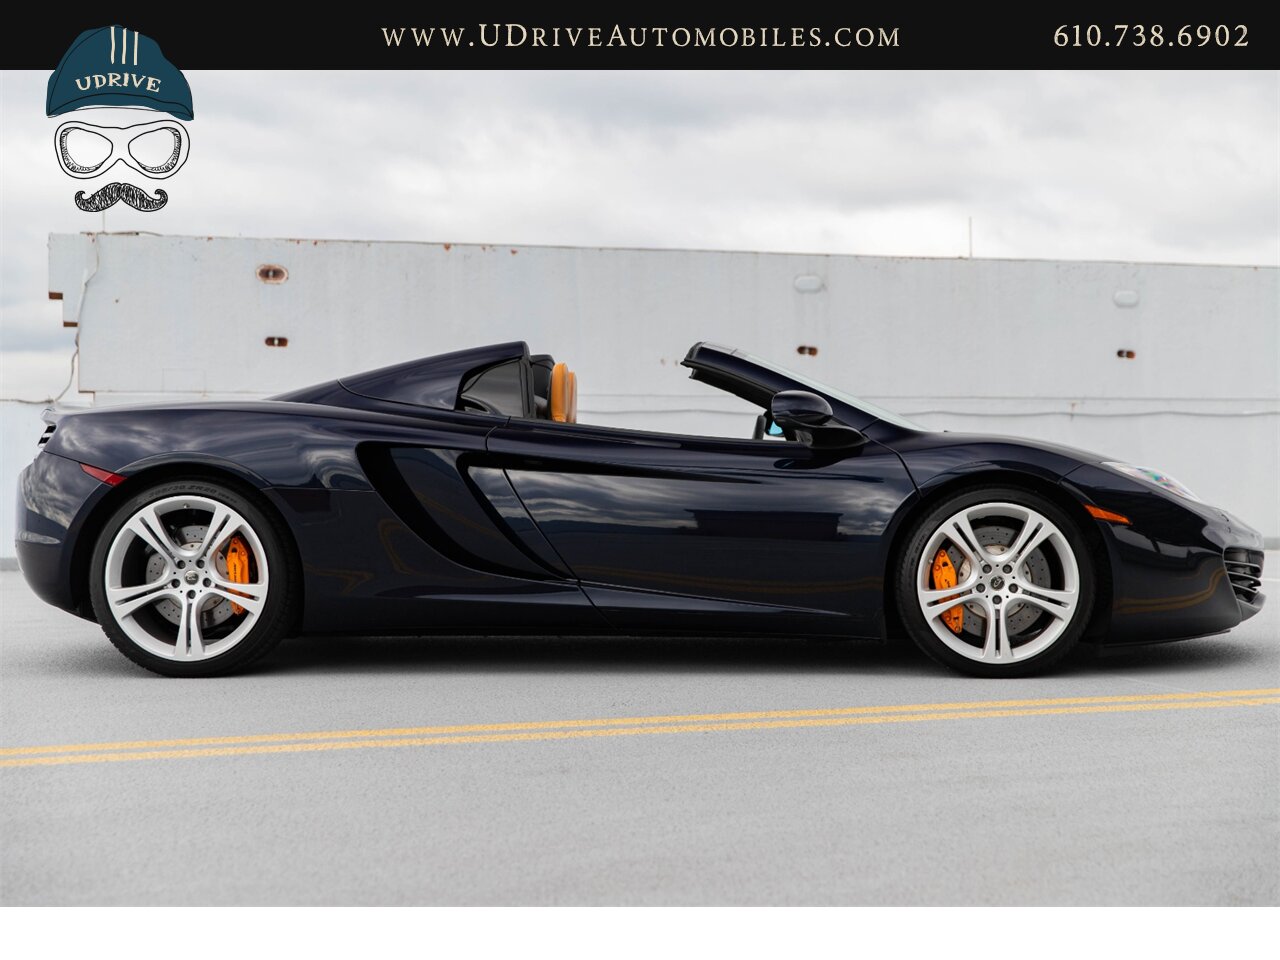 2013 McLaren MP4-12C Spider 1 Owner 6k Miles Carbon Fiber Full Leather  Sapphire Black over Natural Tan Leather - Photo 17 - West Chester, PA 19382